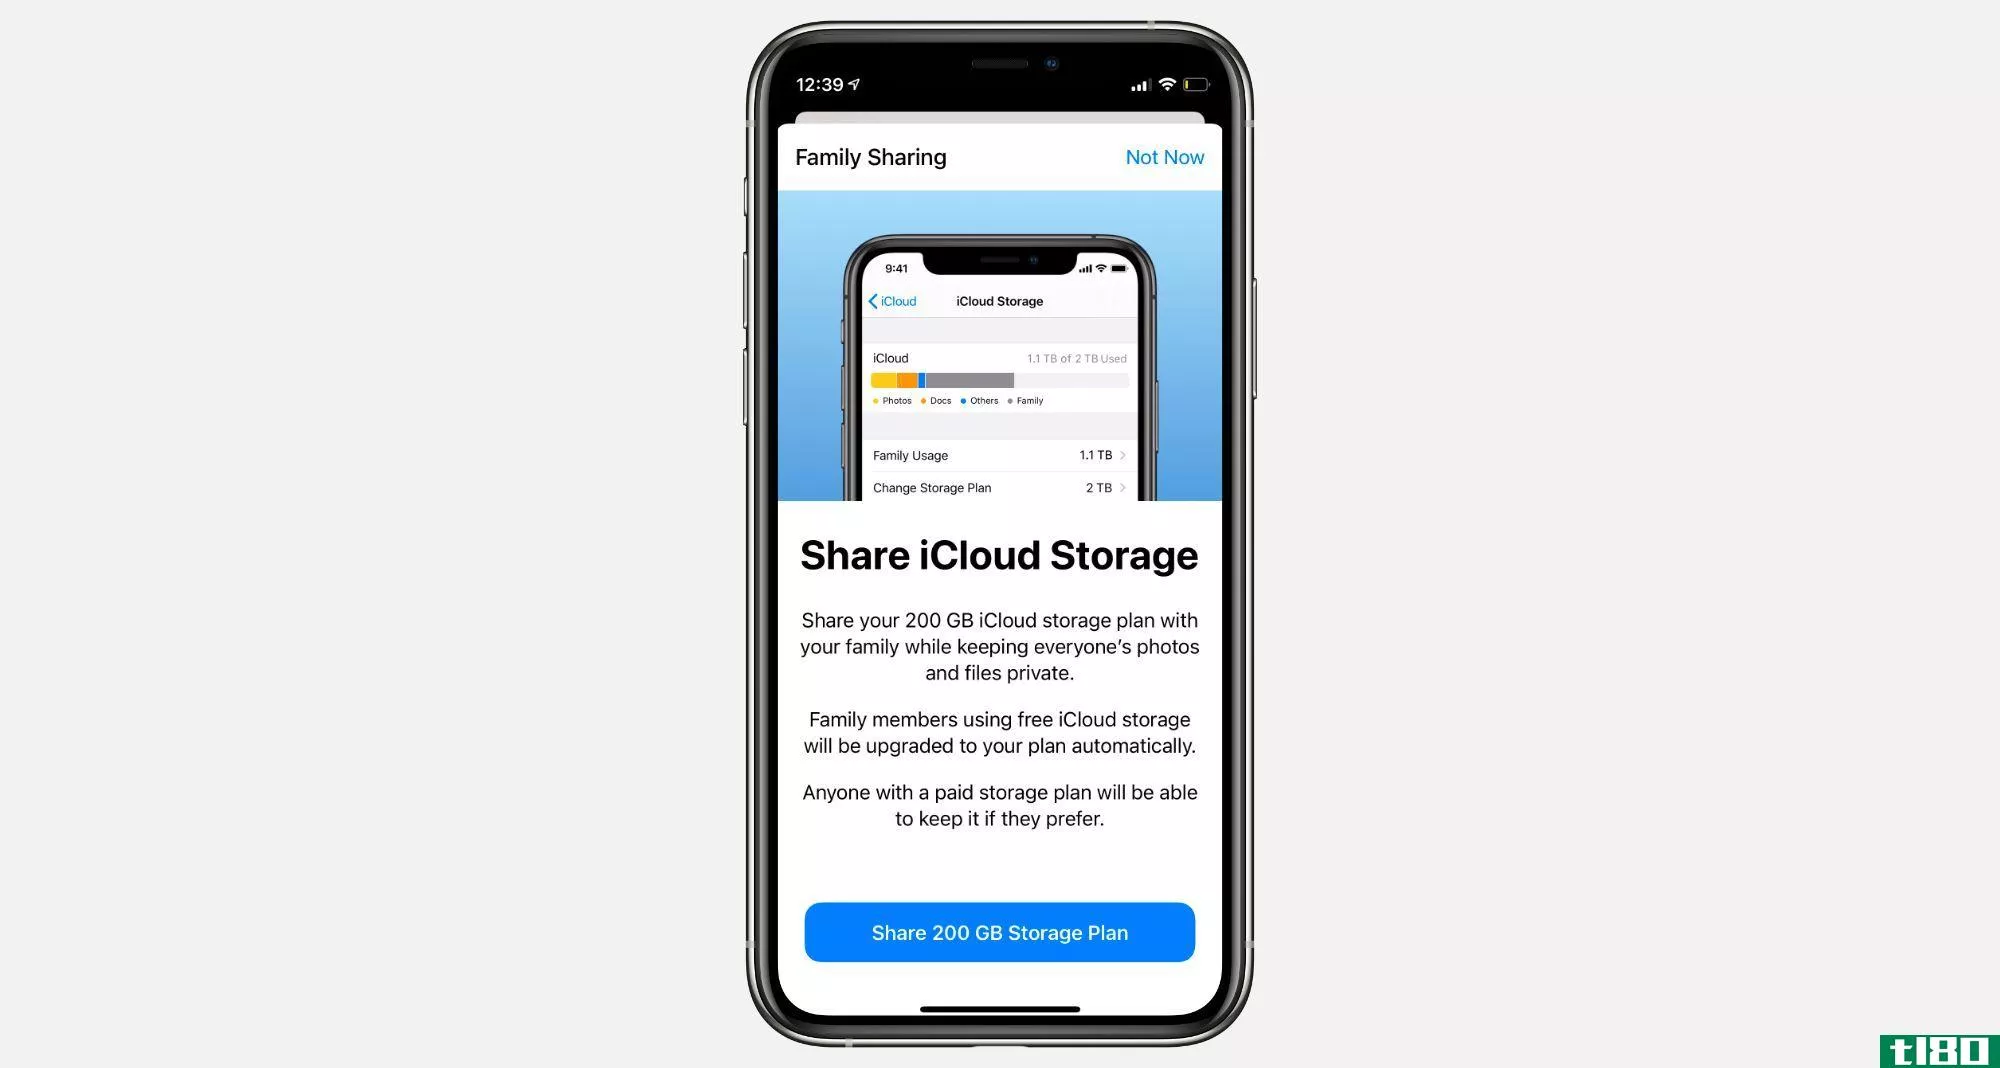 Share iCloud Storage page from Family Sharing settings on iPhone